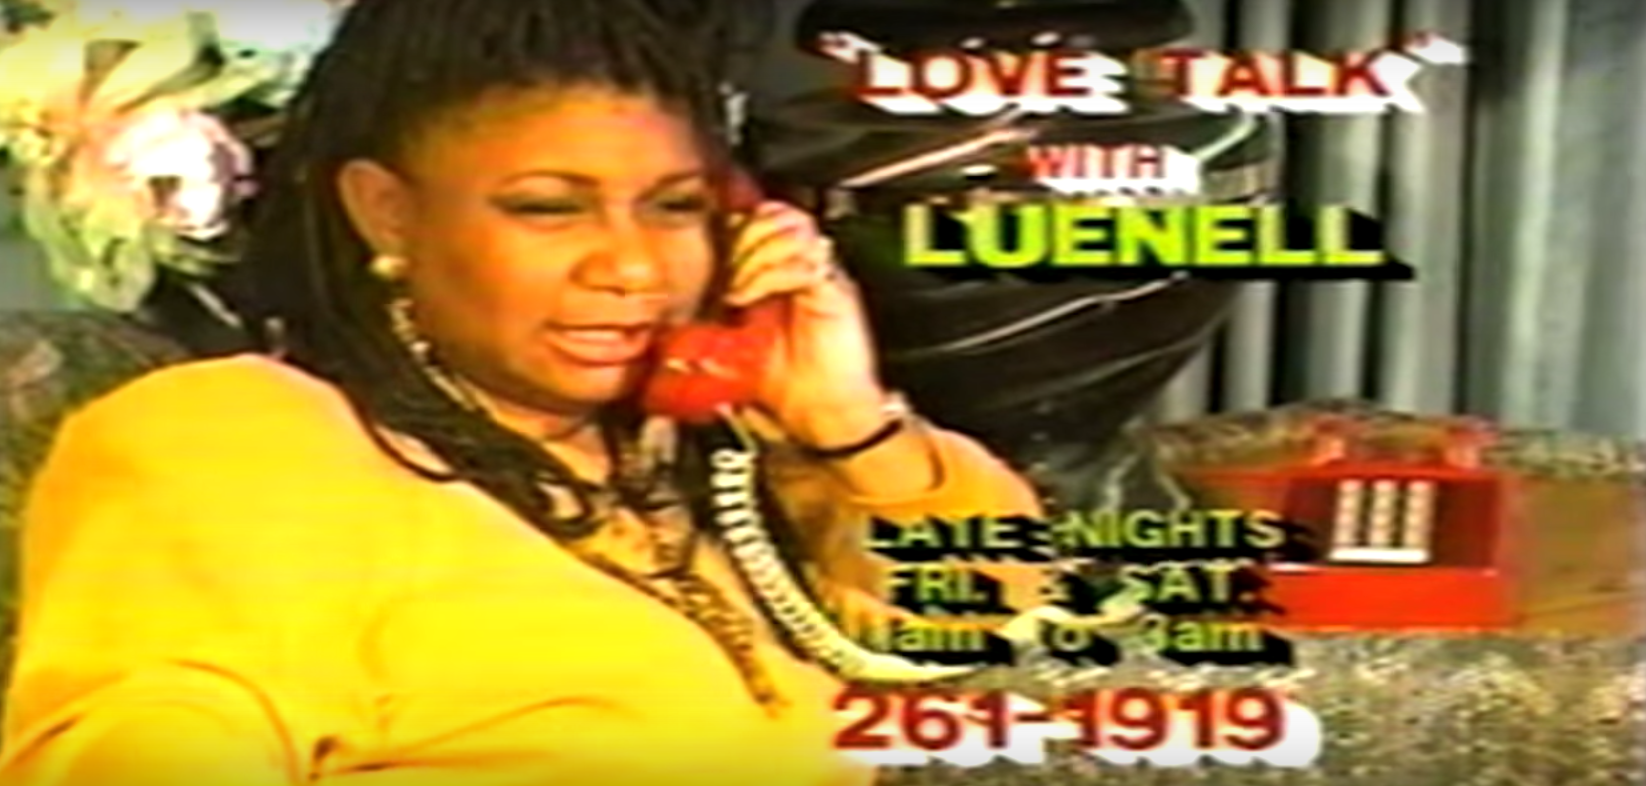 Love Talk with Luenell